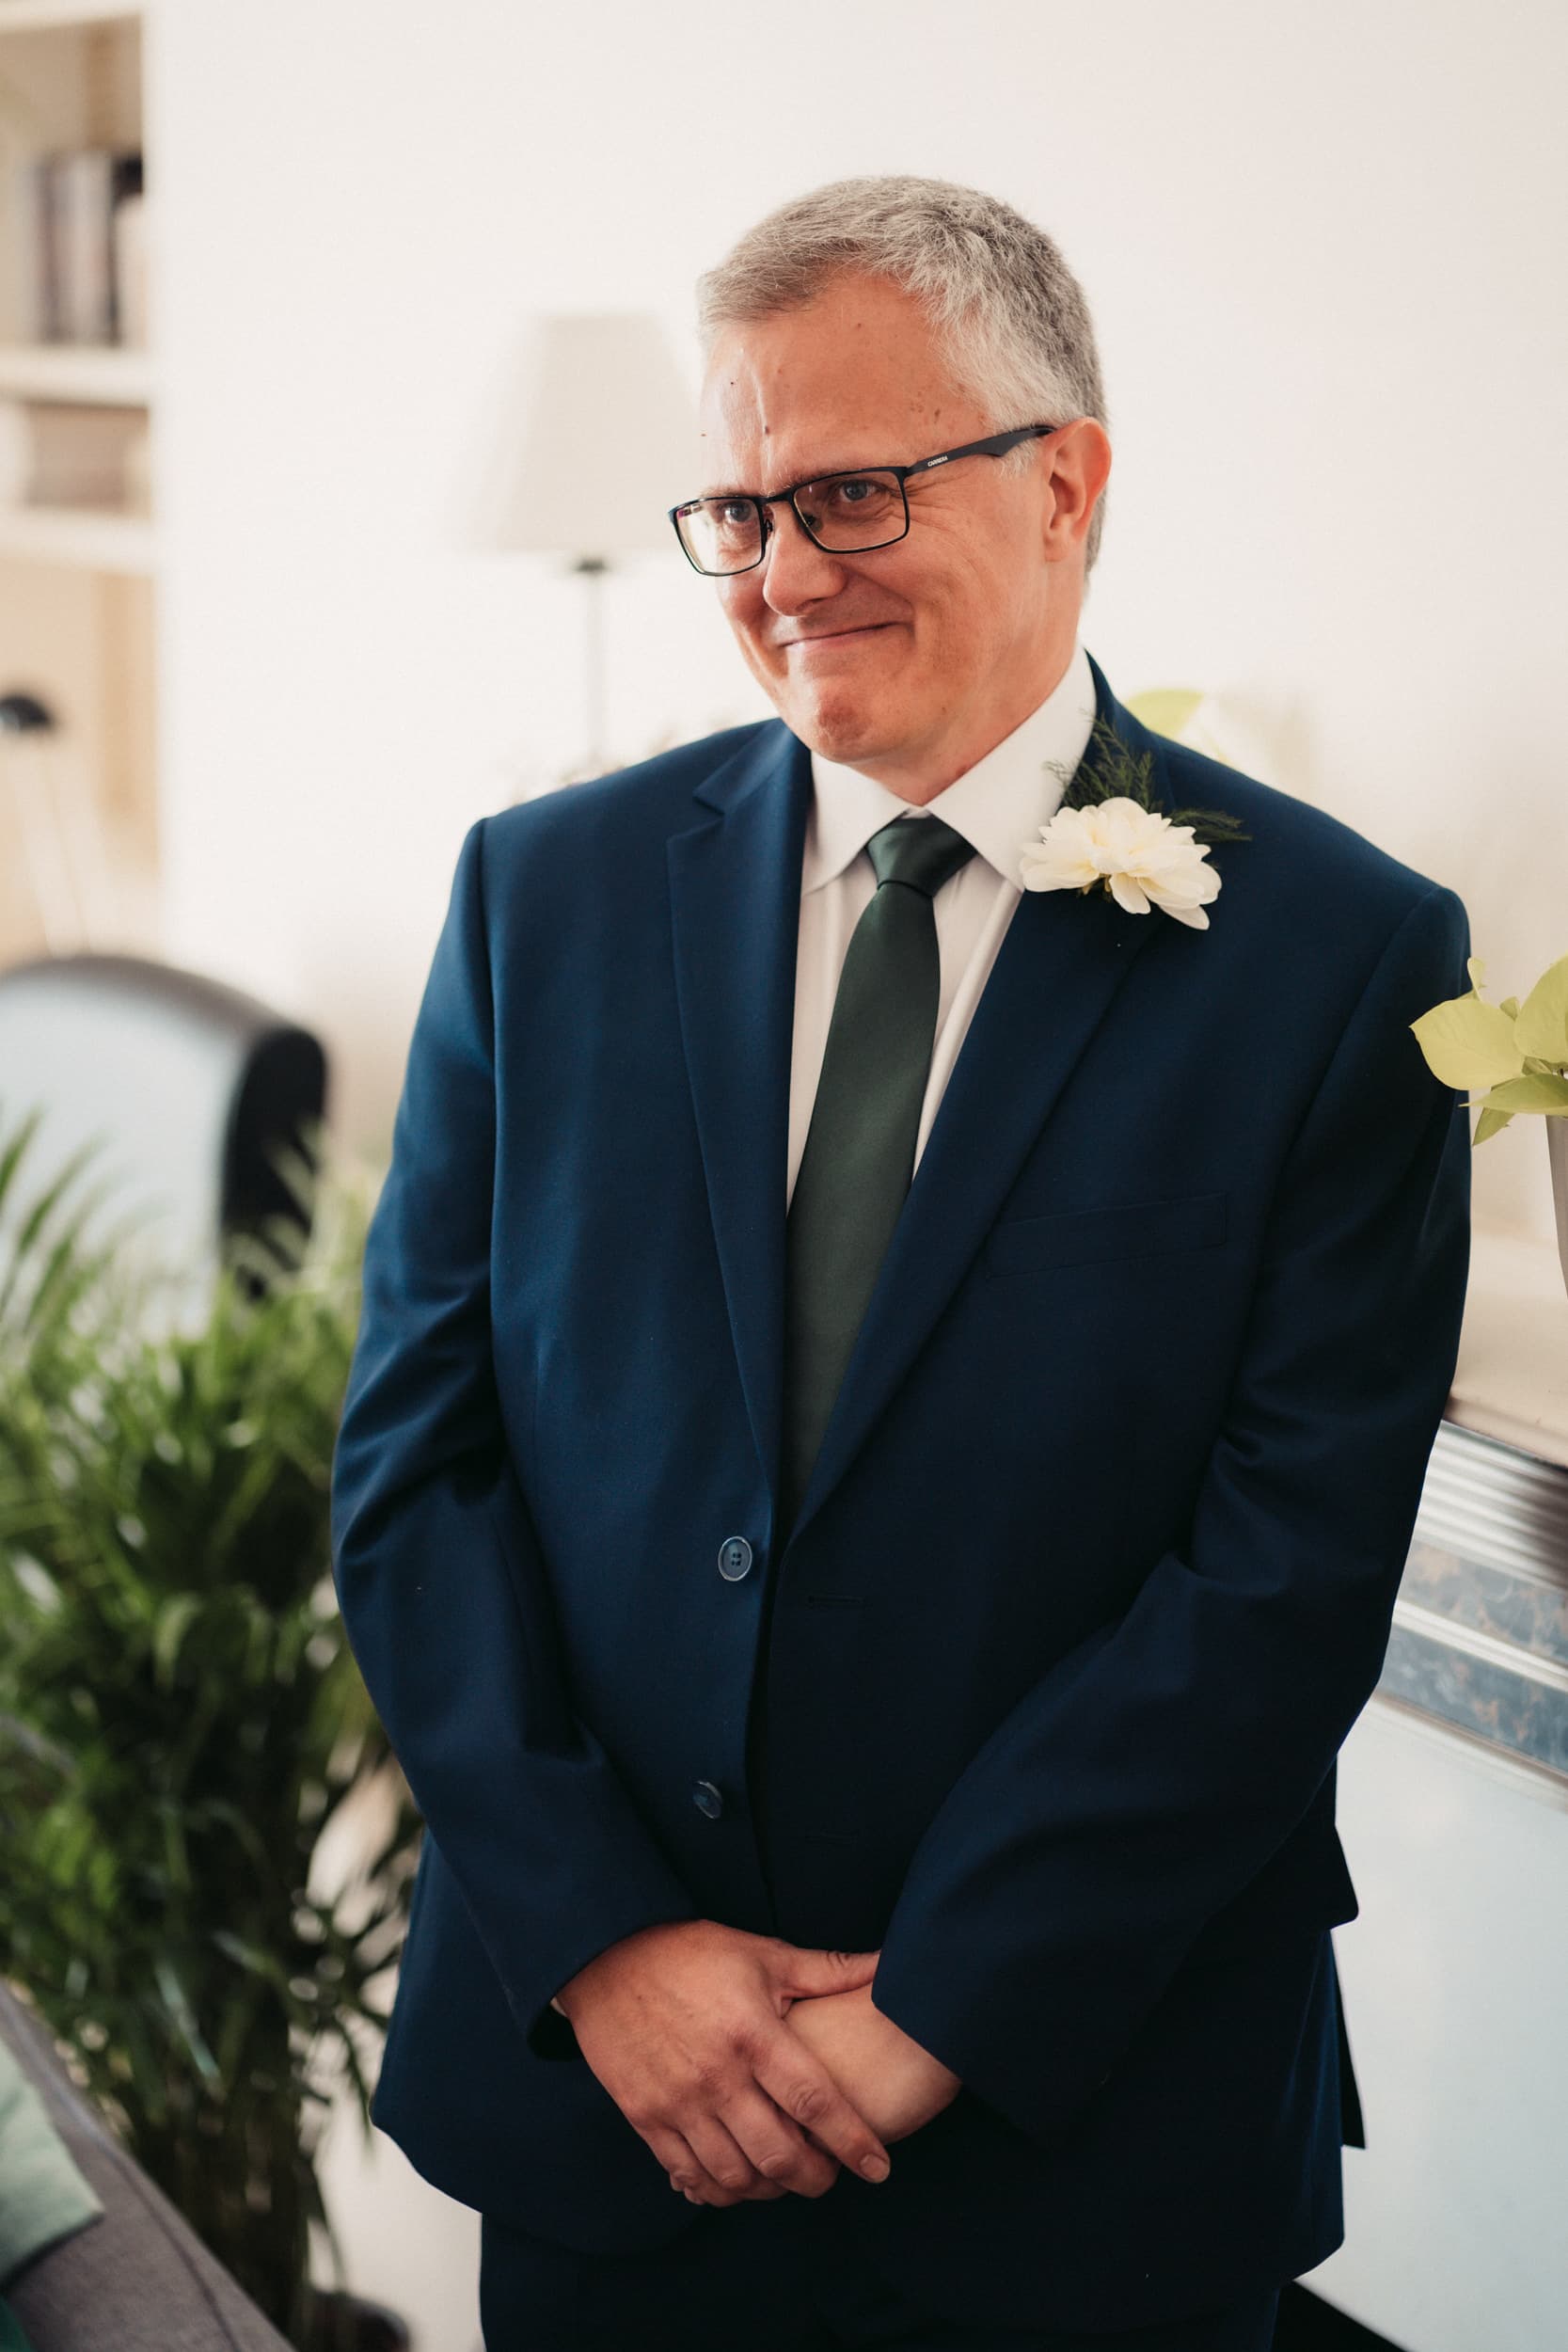 father of the bride seeing his daughter for the first time